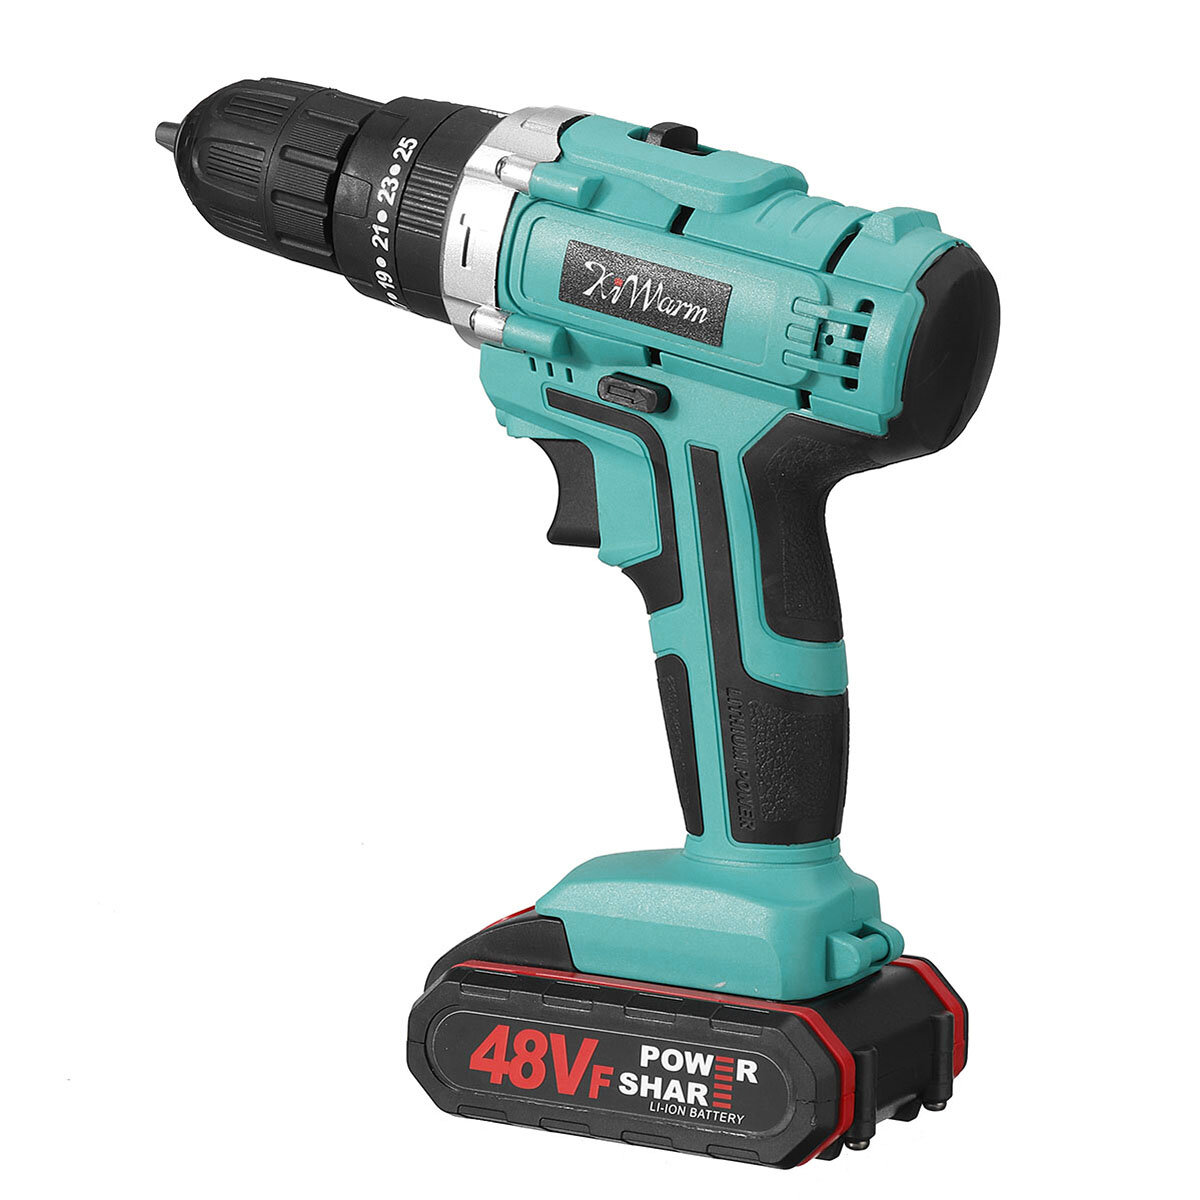 KiWarm 1200mAh 48VF Brushless Cordless Impact Drill Electric Impact Drill with Battery COD